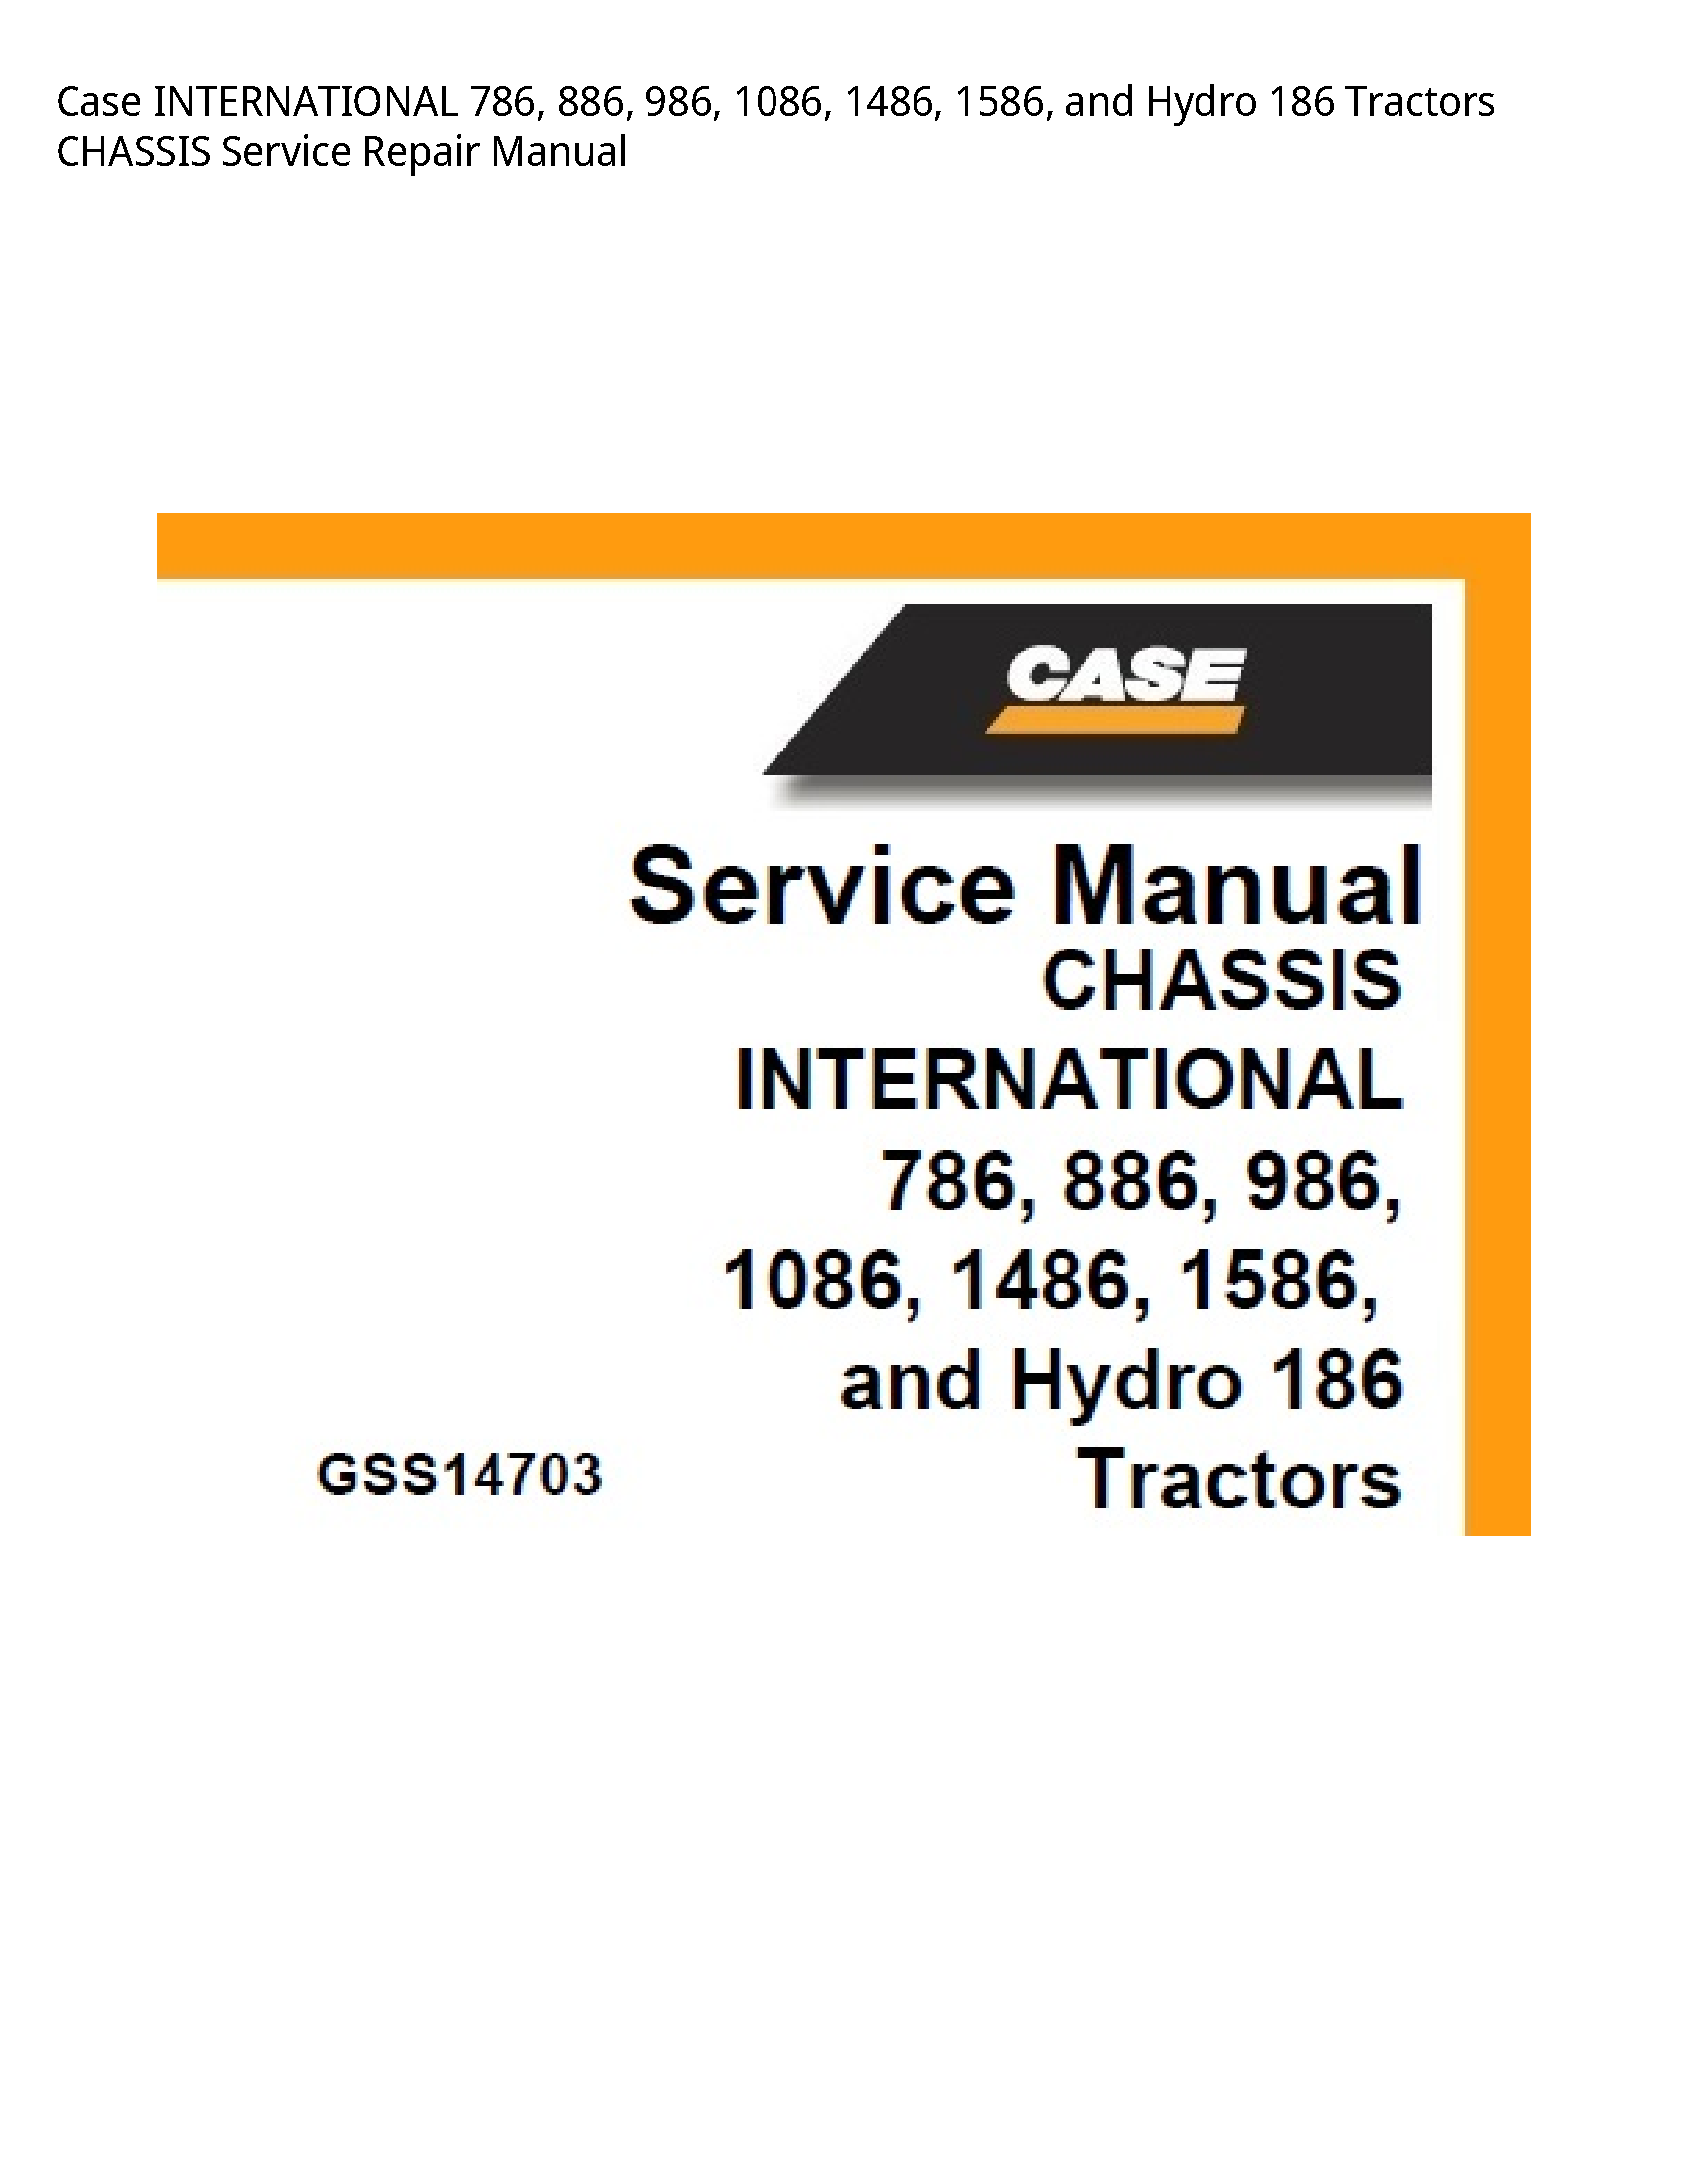 Case/Case IH 786 INTERNATIONAL  Hydro Tractors CHASSIS manual